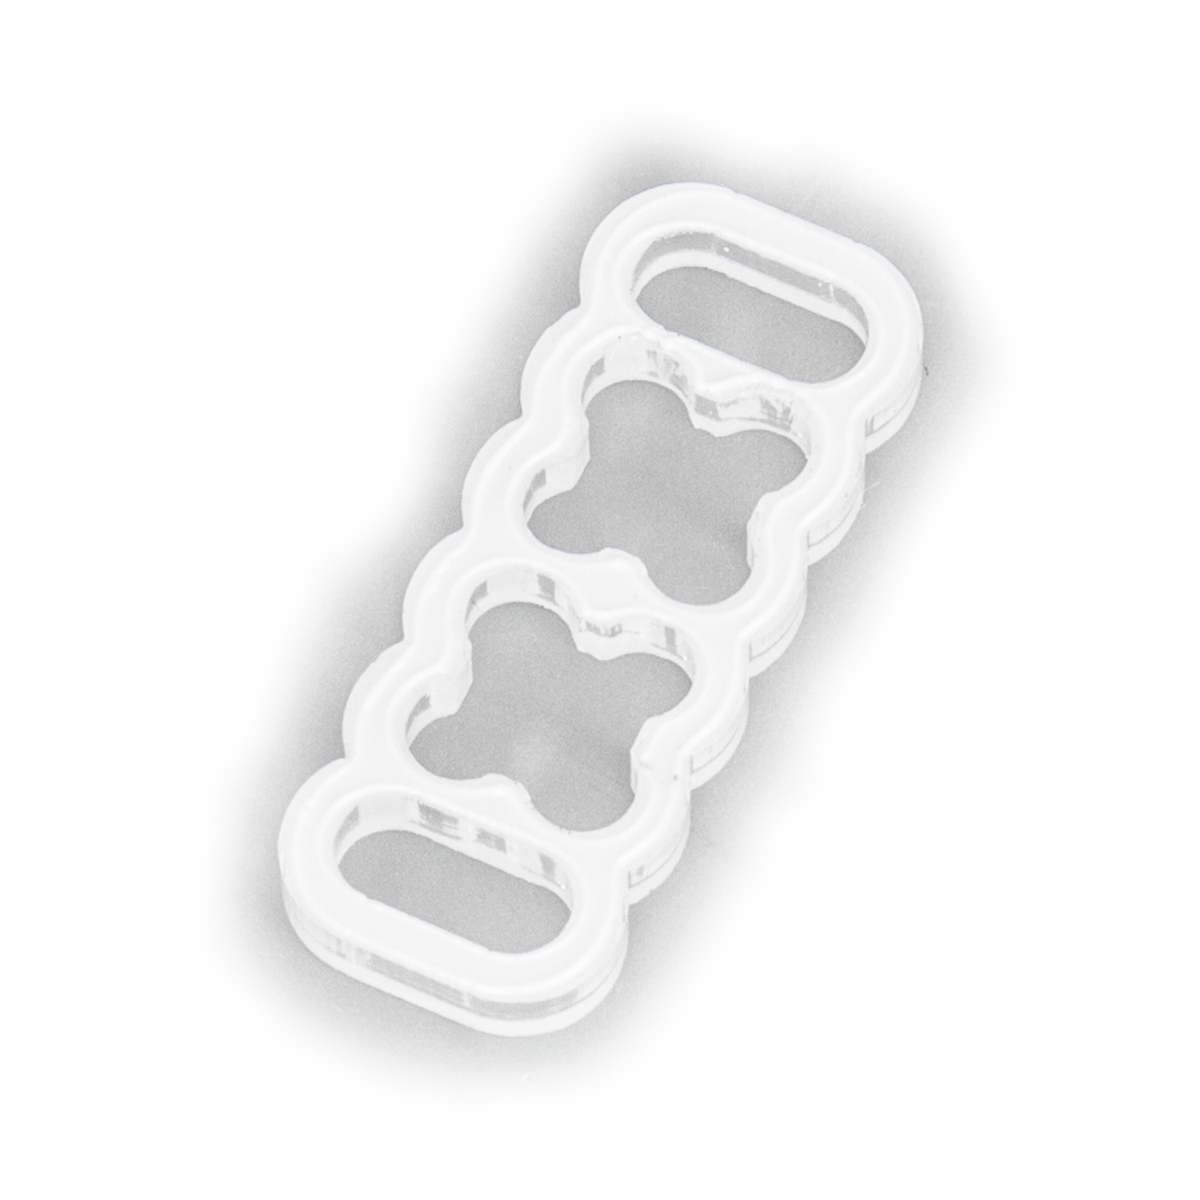 TechForge 12 Slot Stealth Cable Comb V2 - Clear